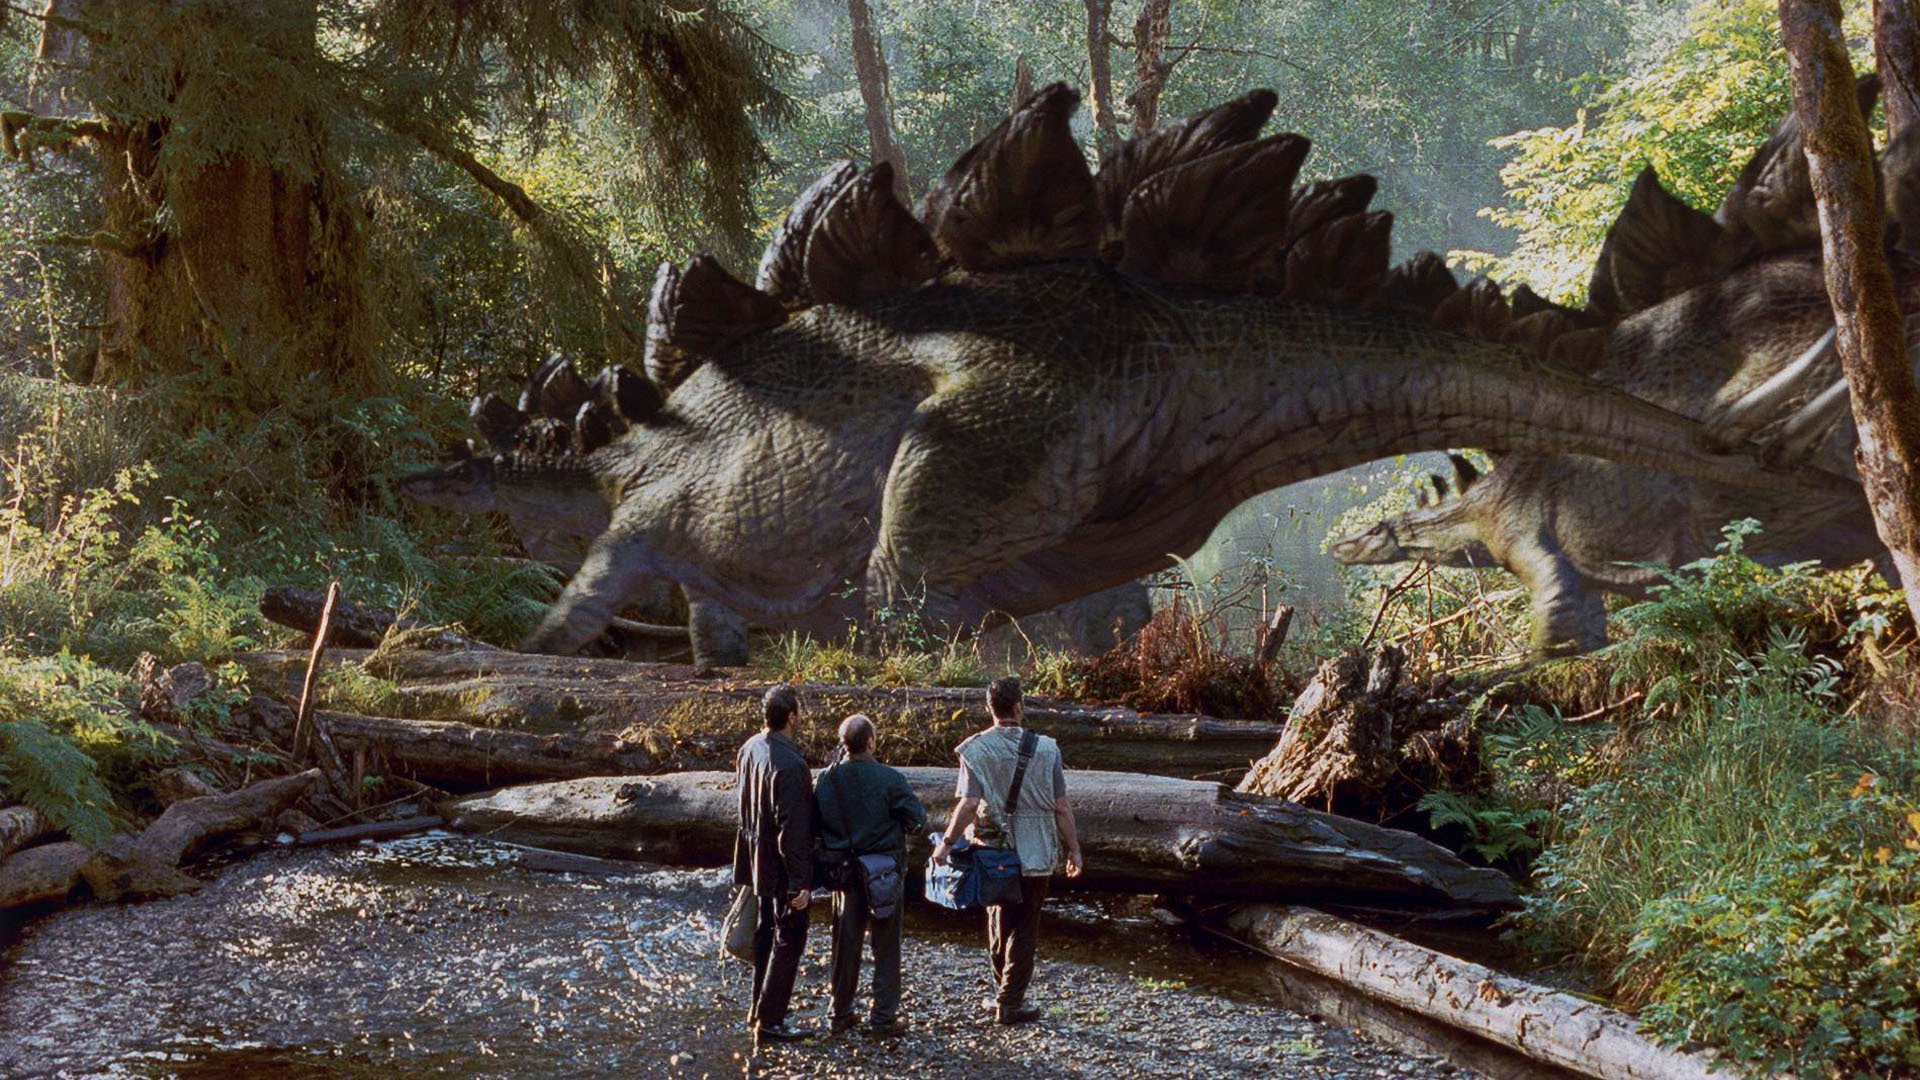 jurassic-world-streaming-guide-where-to-watch-online-den-of-geek